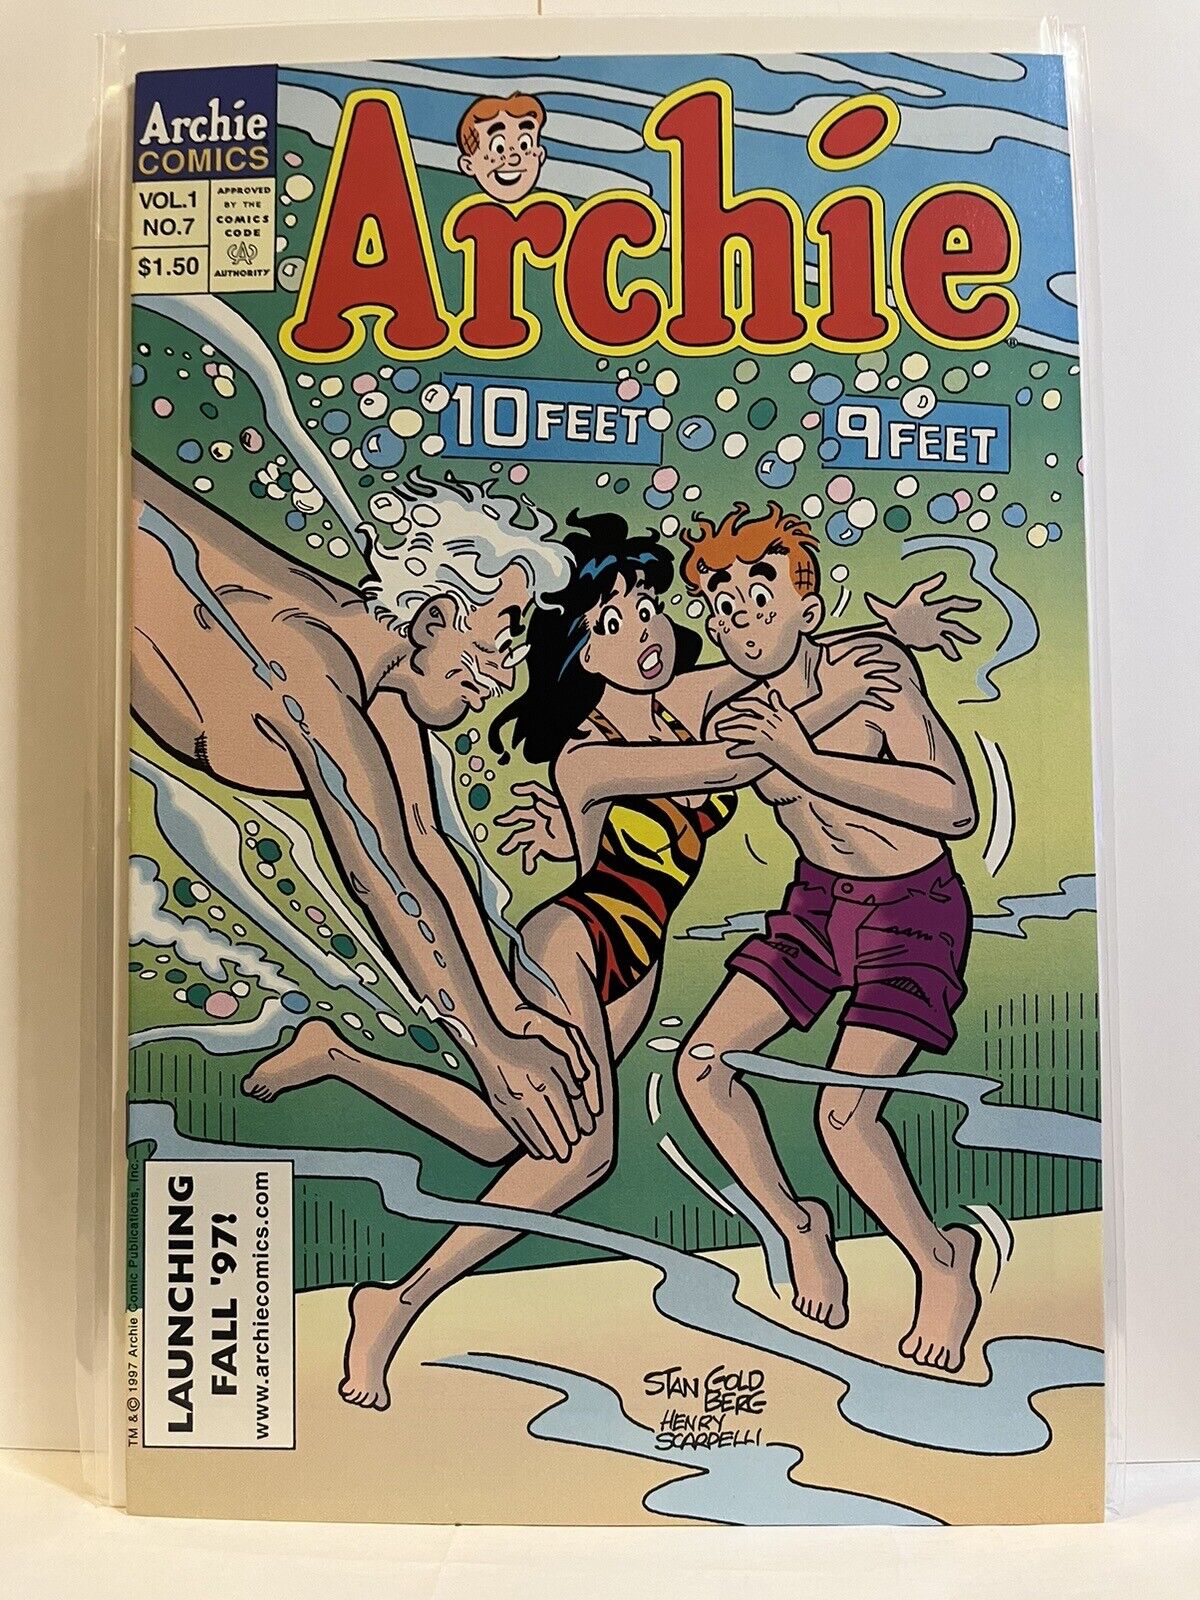 Archie's Ten Issue Collector Set Volume 1 #7 (Archie Comics) VF/NM